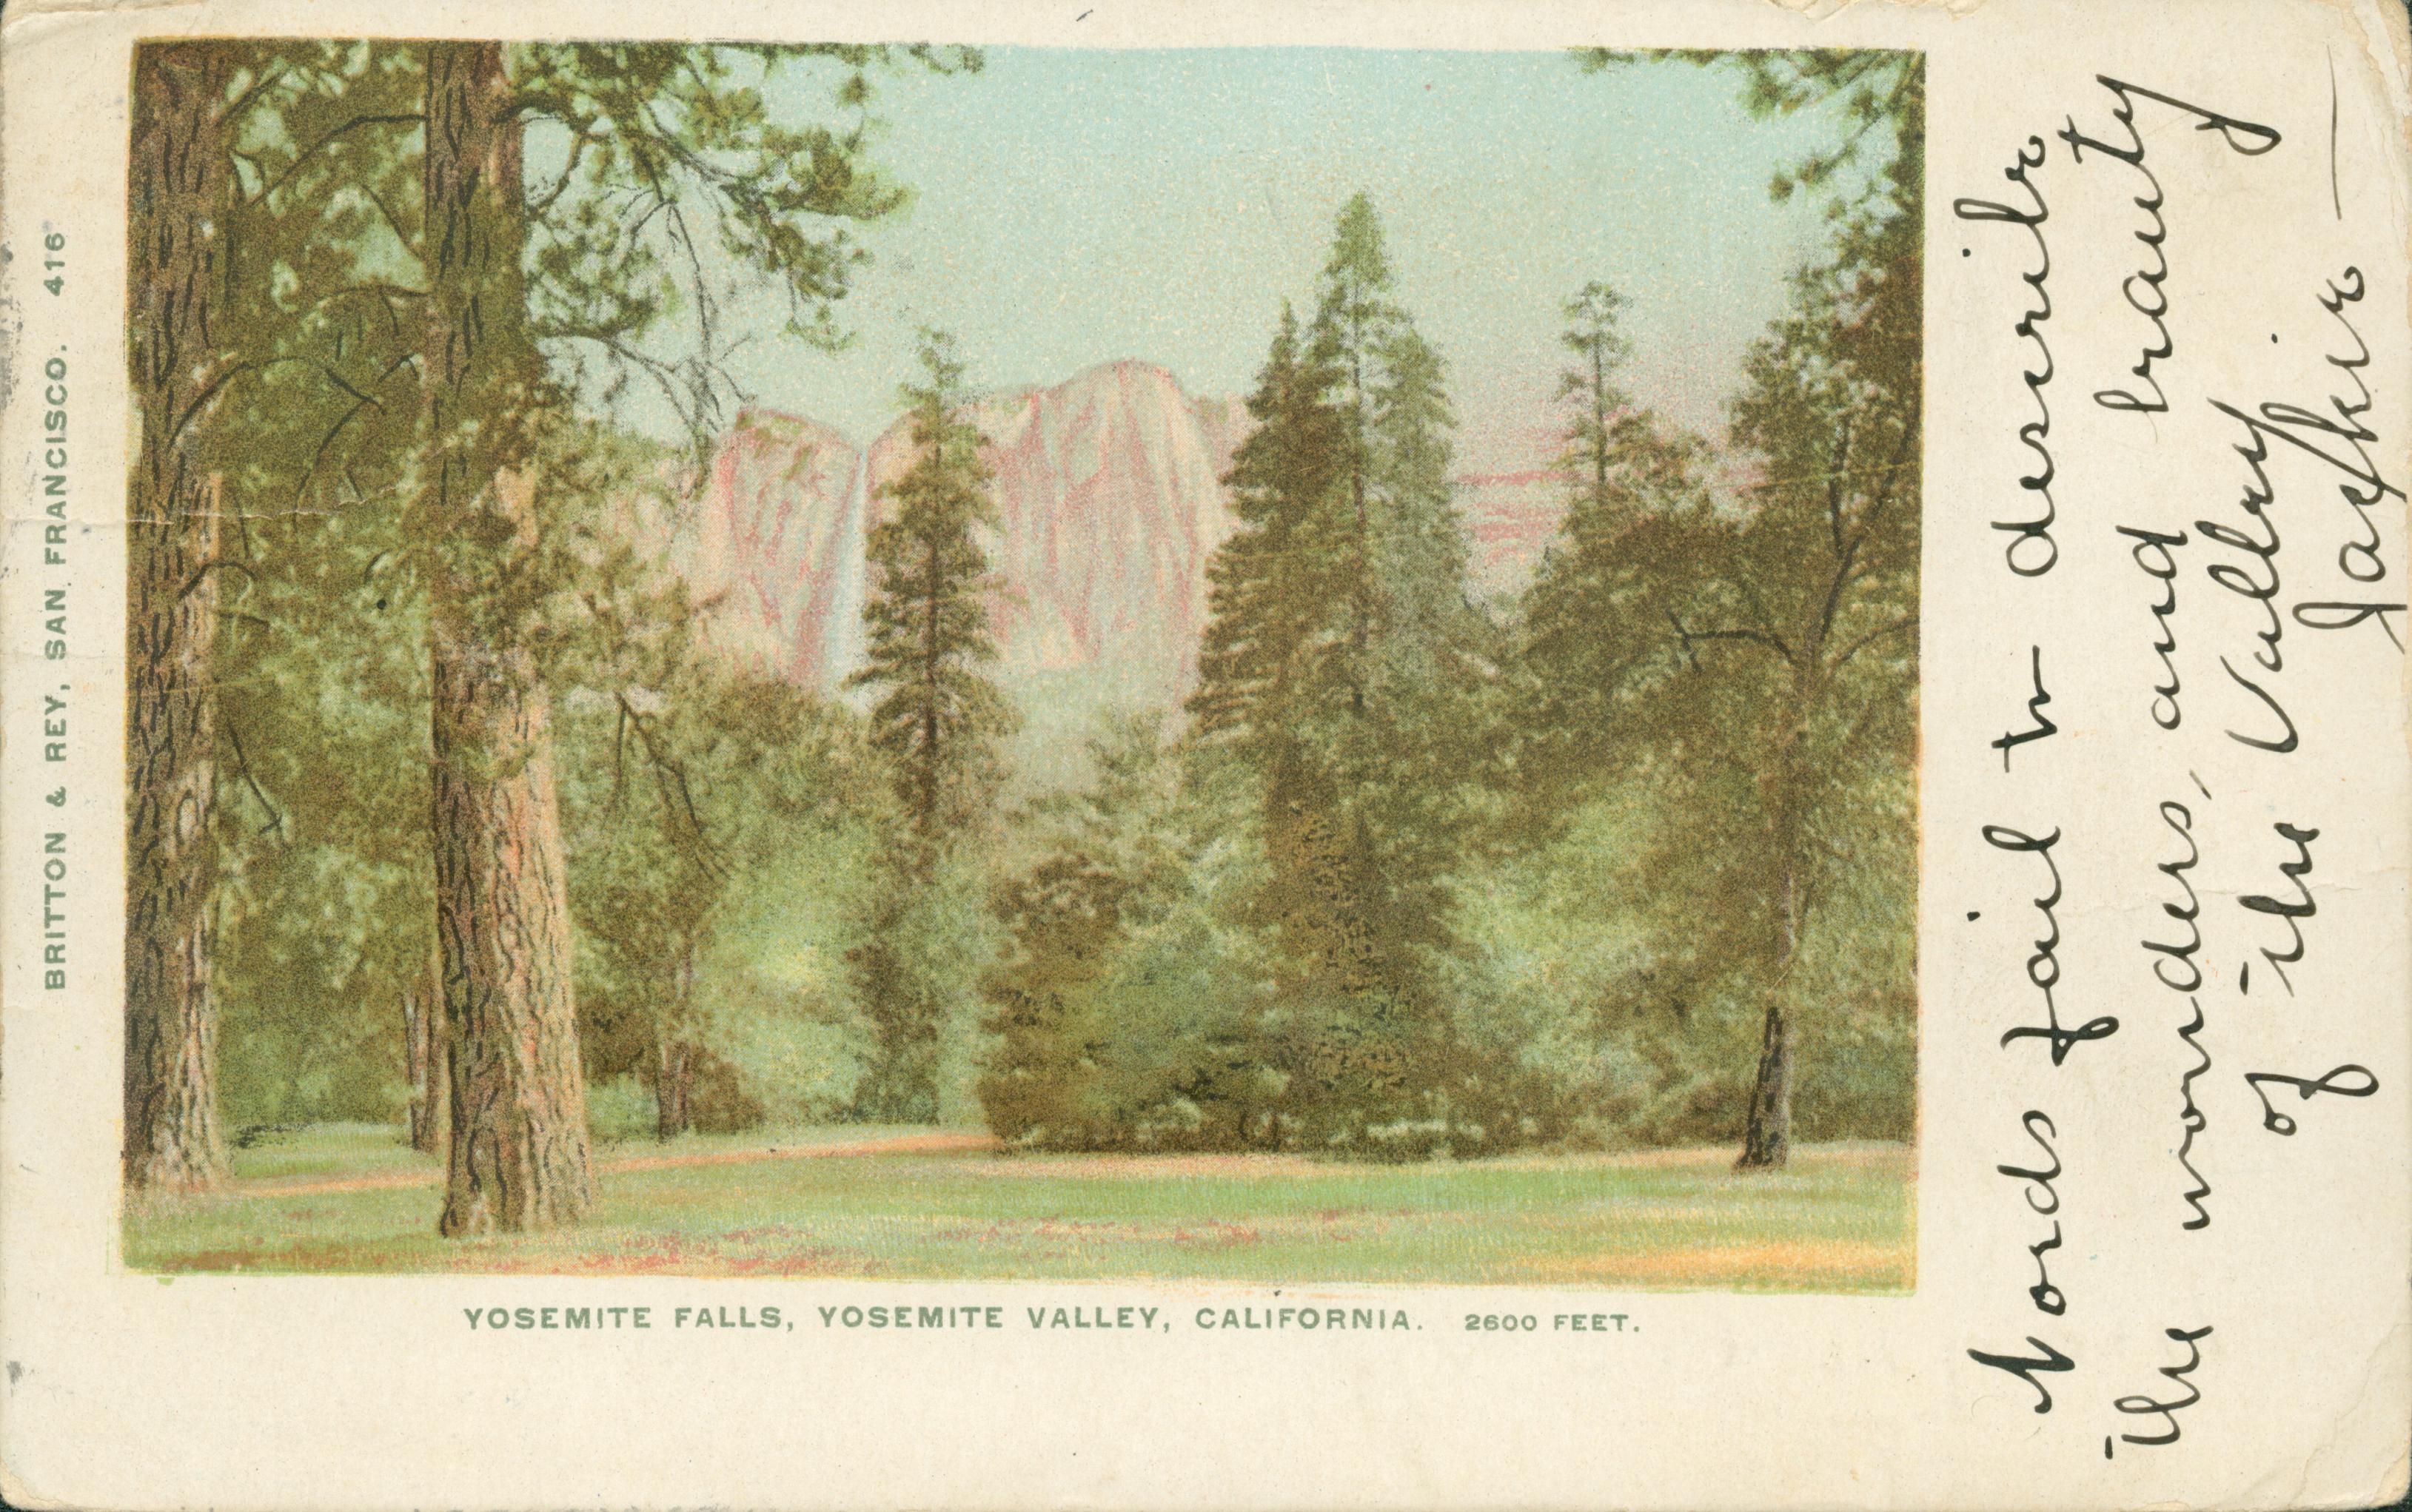 Shows a meadow lined by a grove of trees with Yosemite Falls in the background